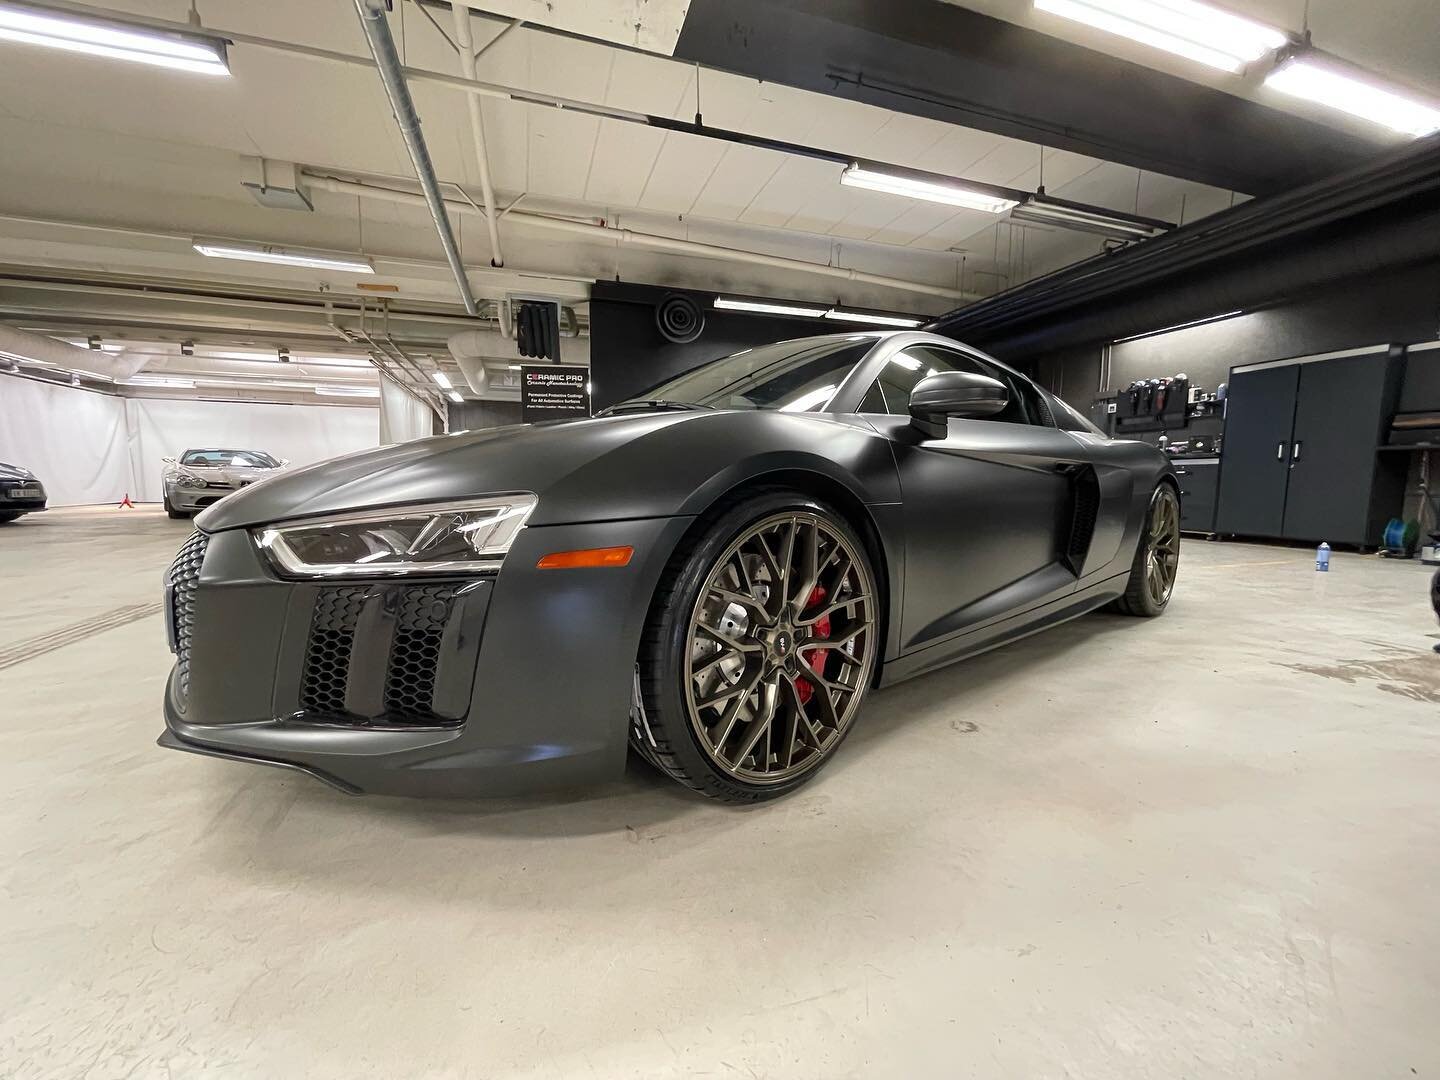 #Stealthmode enabled! 2017 Audi R8 fully wrapped in #averydennison Blacl Rock Grey. #batman worthy! #batmobile #stealth #audi #r8  #v10 #quattro wheels delivered by @customizedno